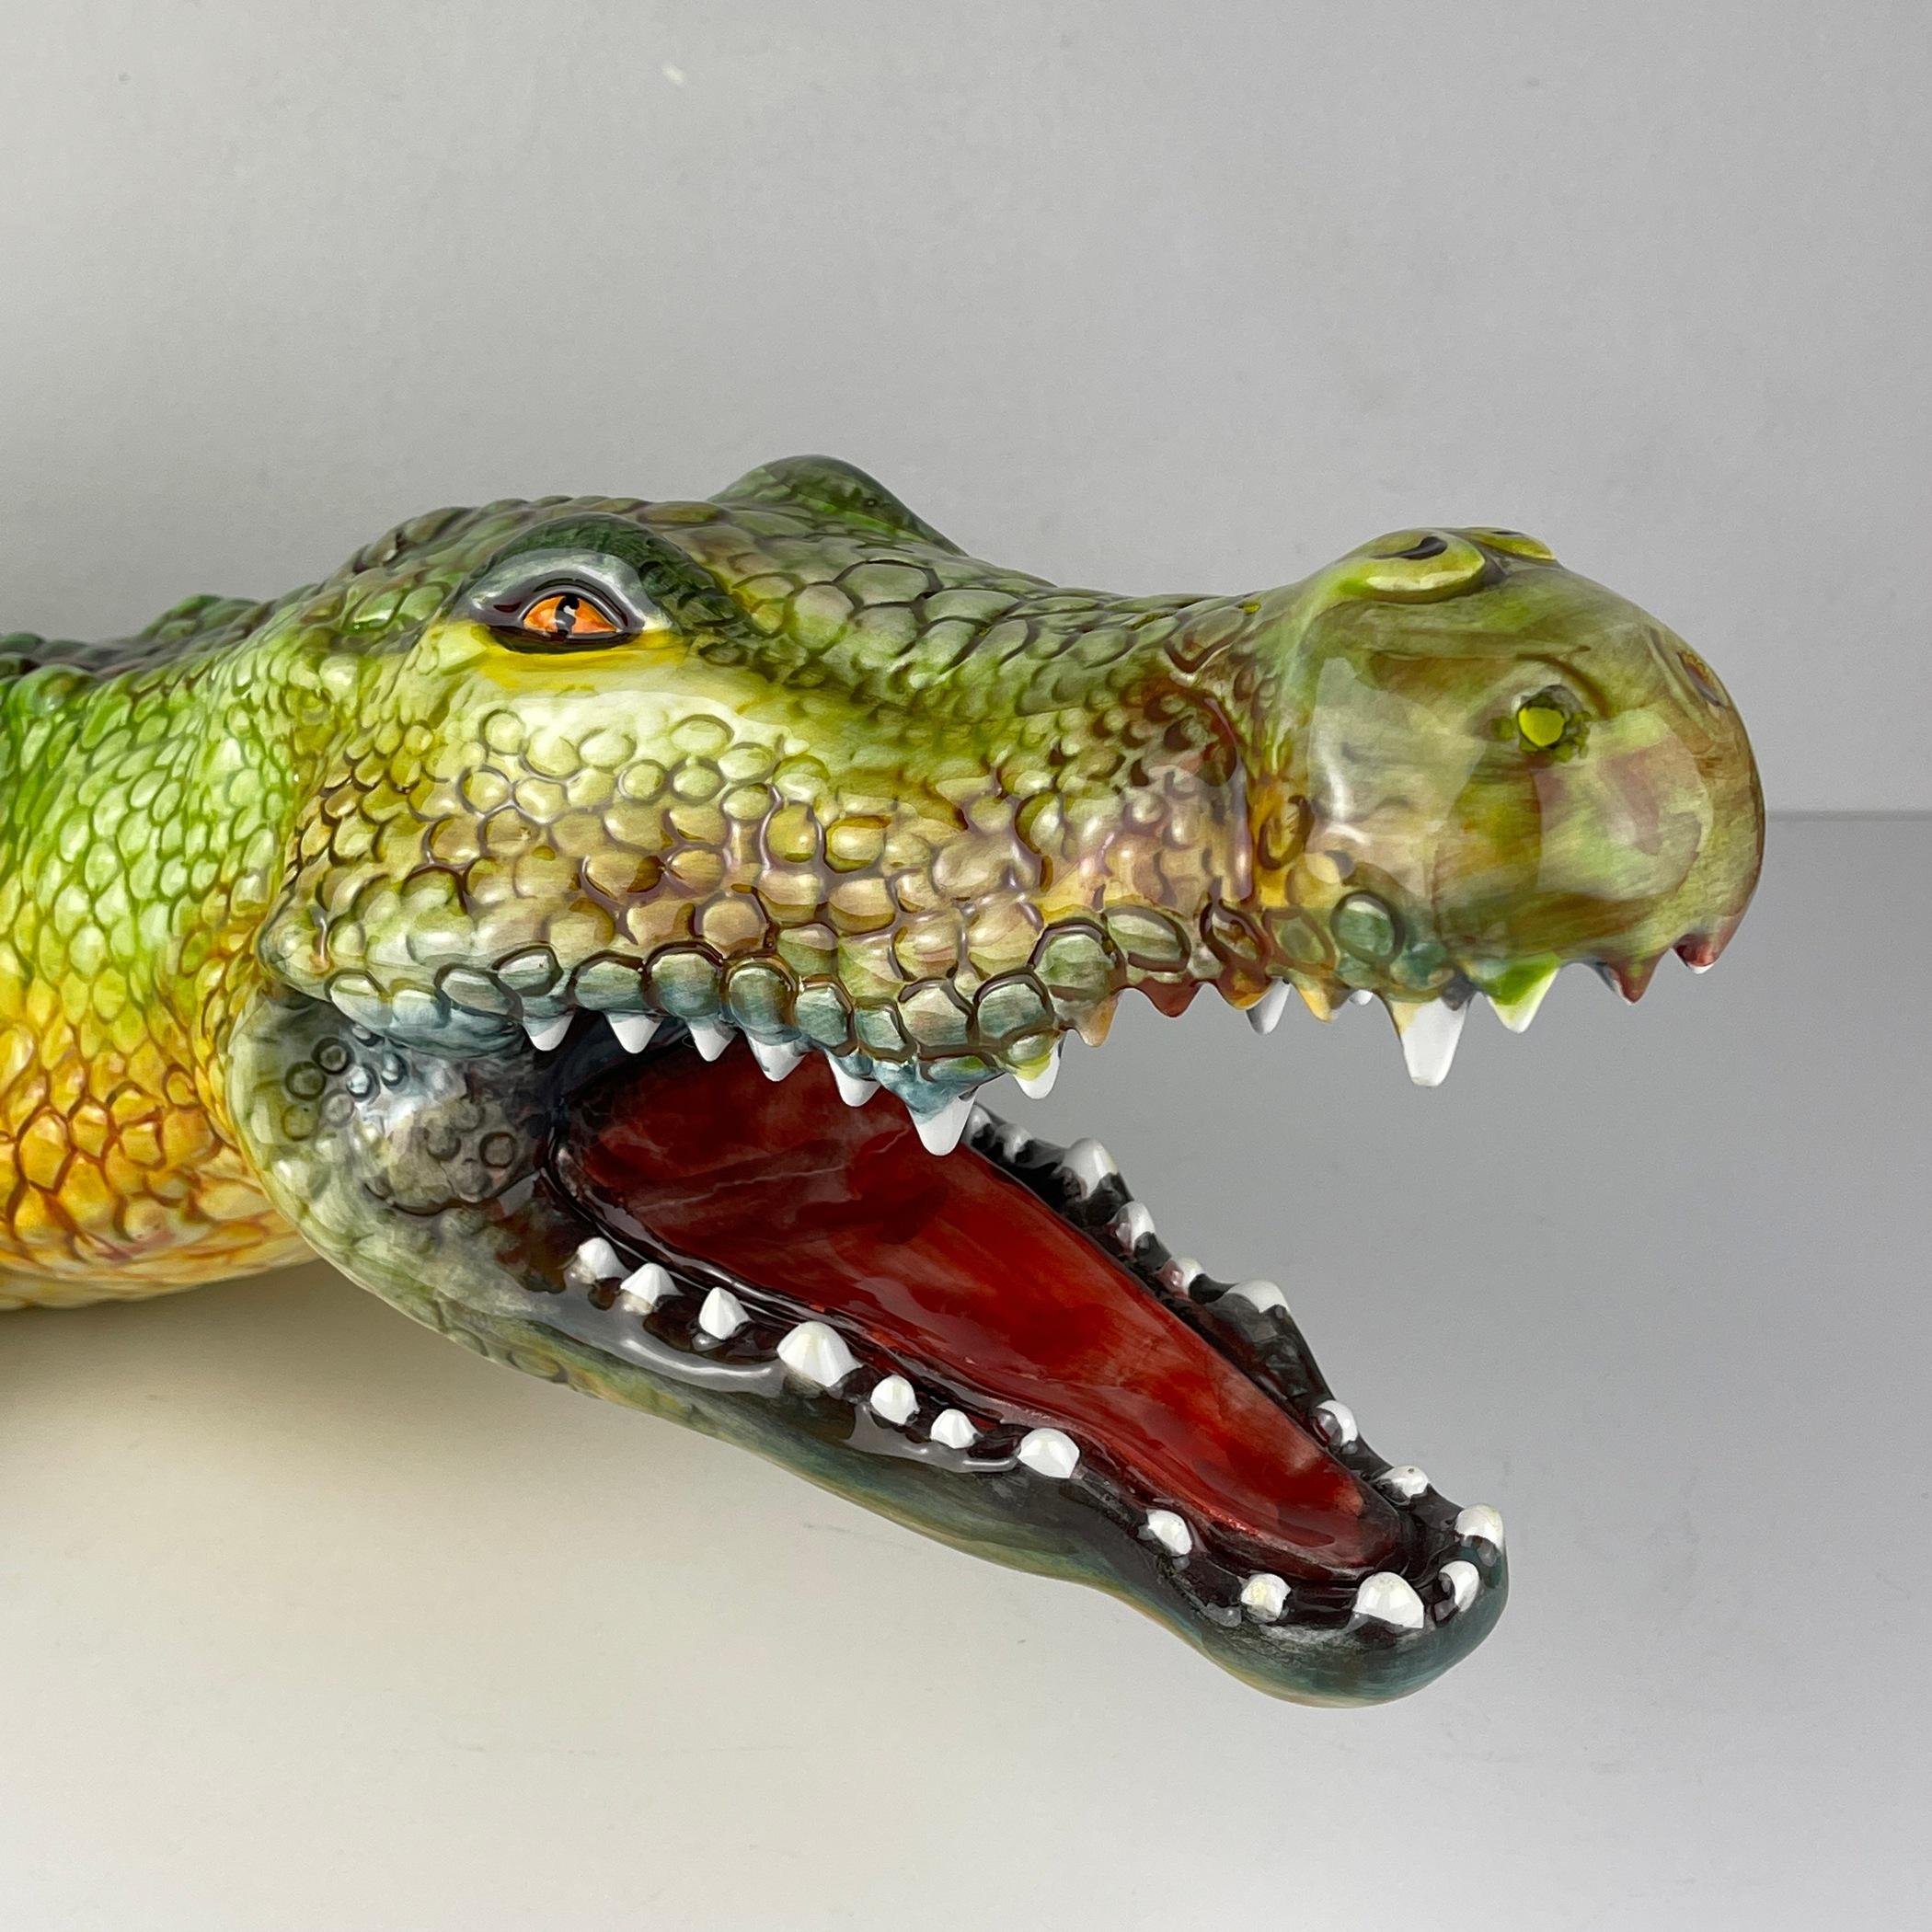 The stunning large hand painted ceramic animal sculpture of Crocodile made in Bassano Italy in the 1980s.
A very rare sculpture. In great condition.
The perfect addition to any surface and certainly to any home or even office that instantly